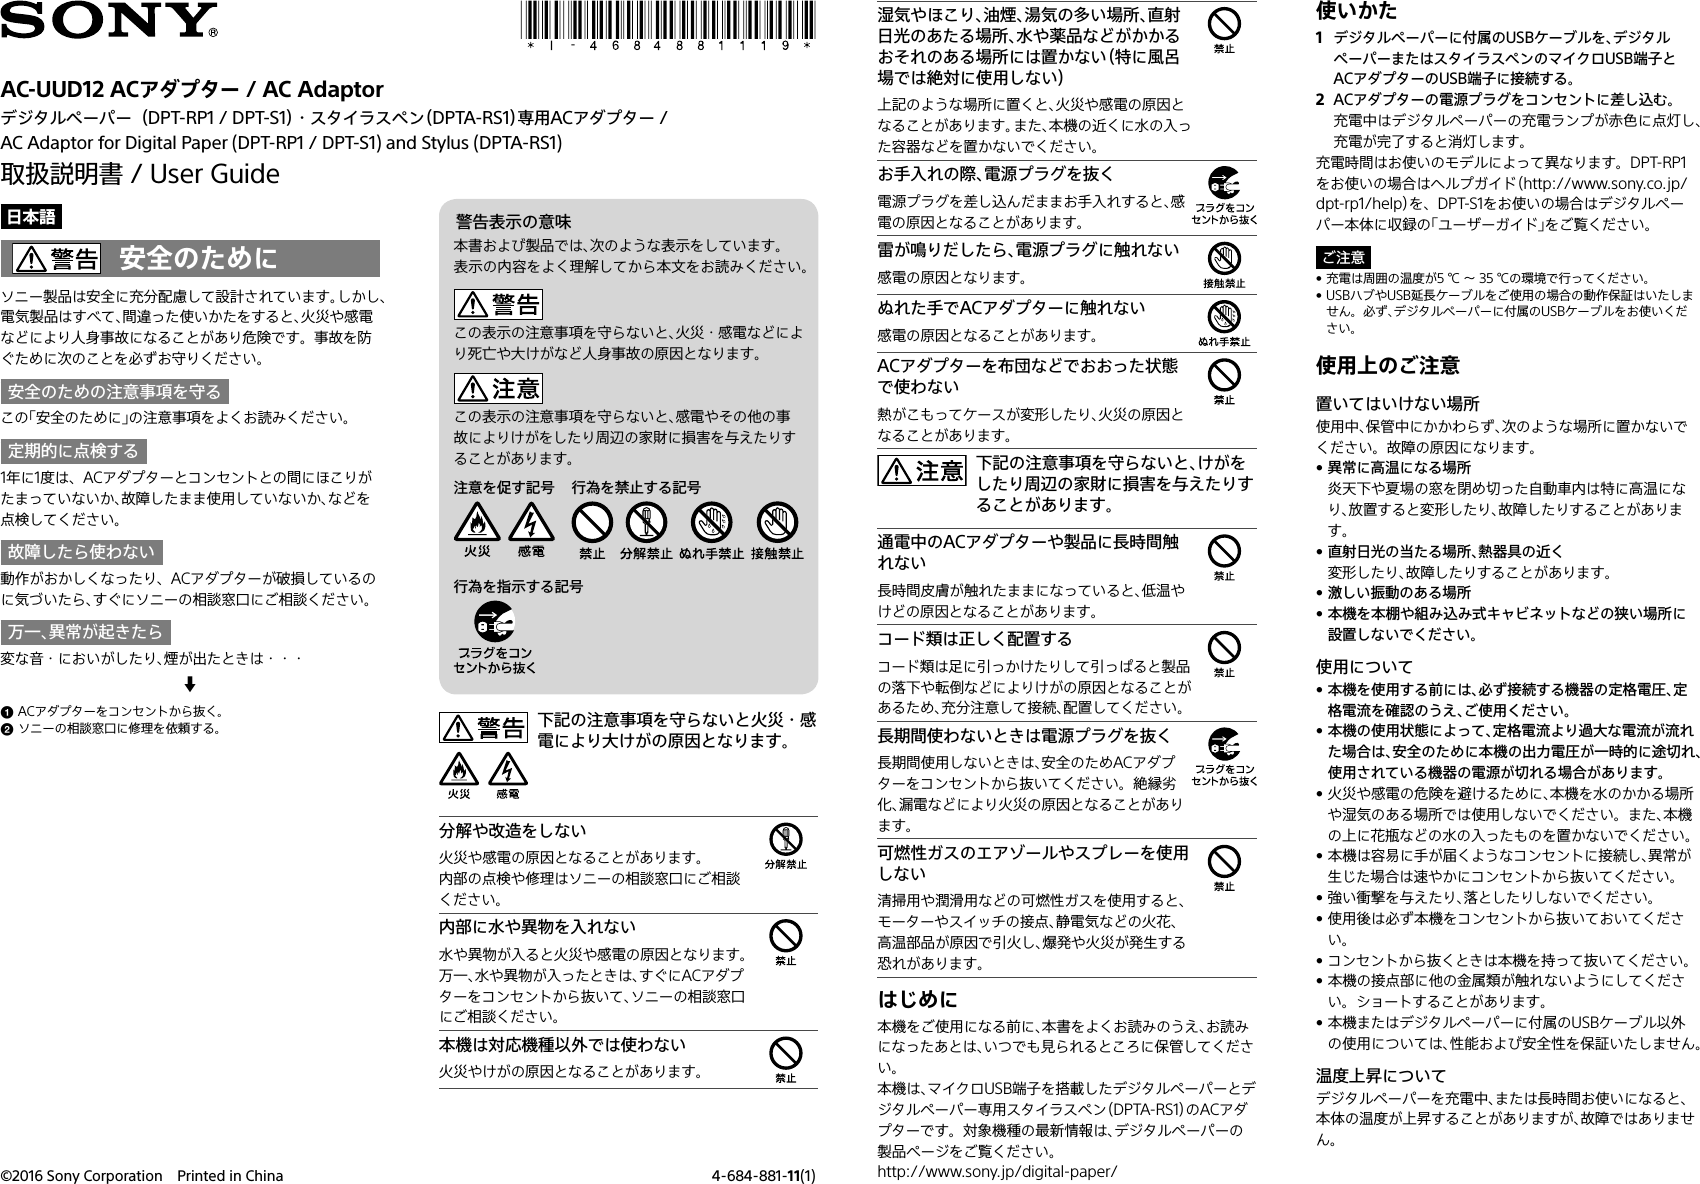 Page 1 of 2 - Sony AC-UUD12 User Manual Guide 4684881111